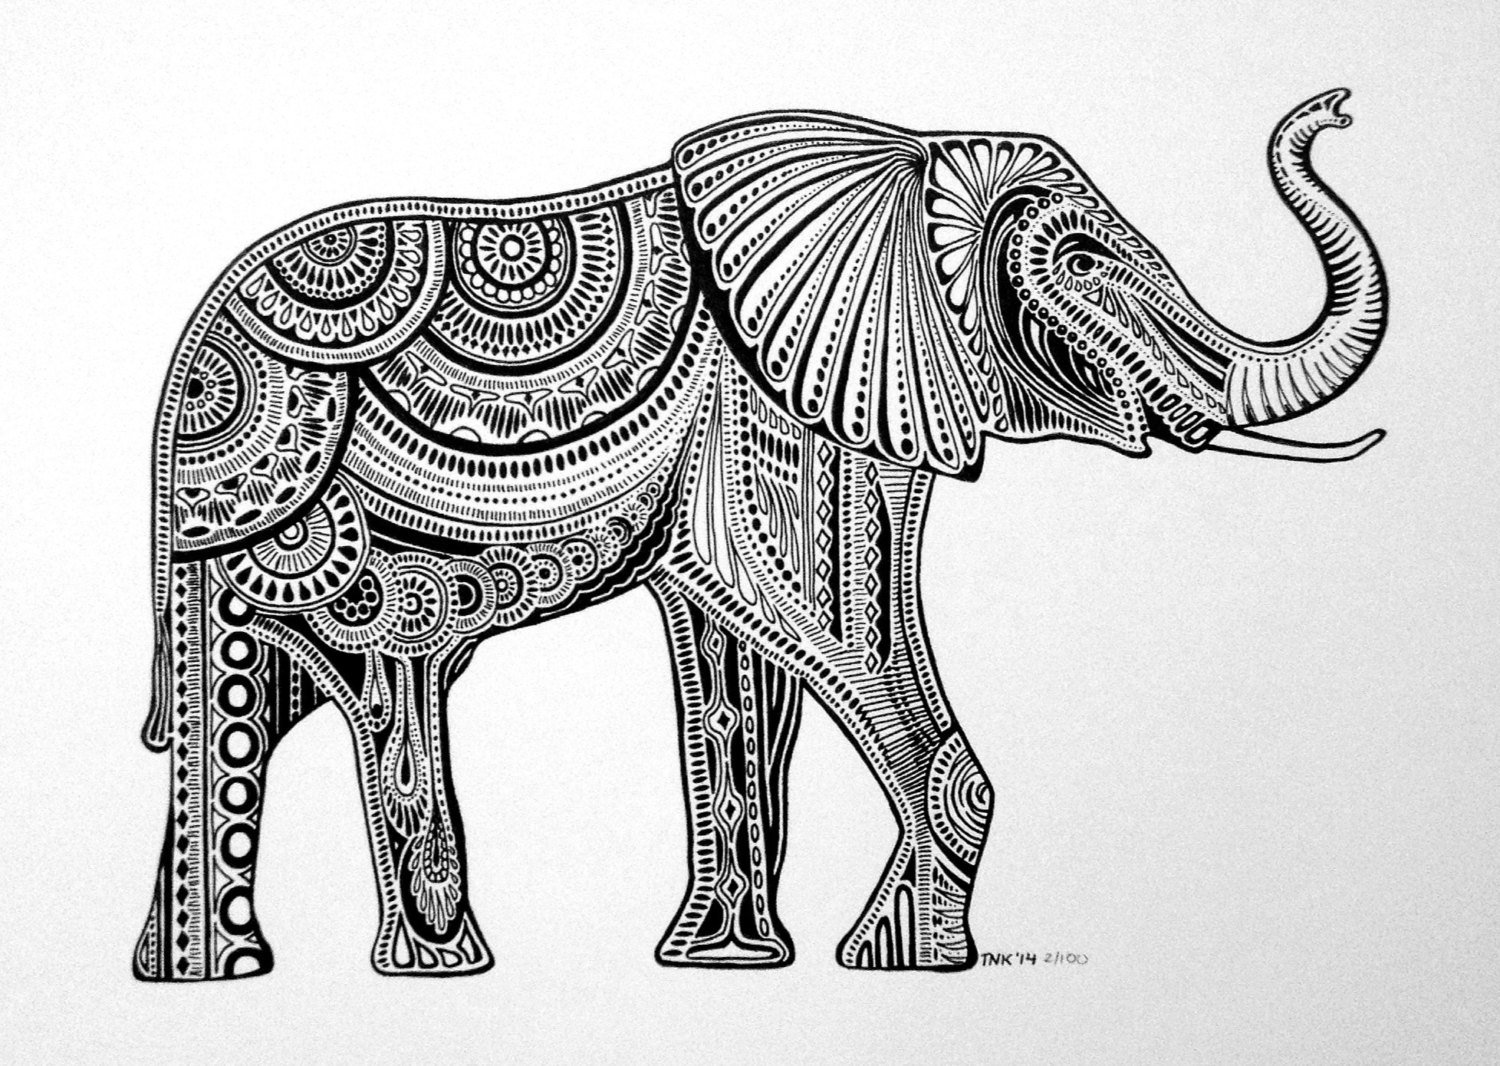 Drawings Of Elephants With Trunk Up at Explore